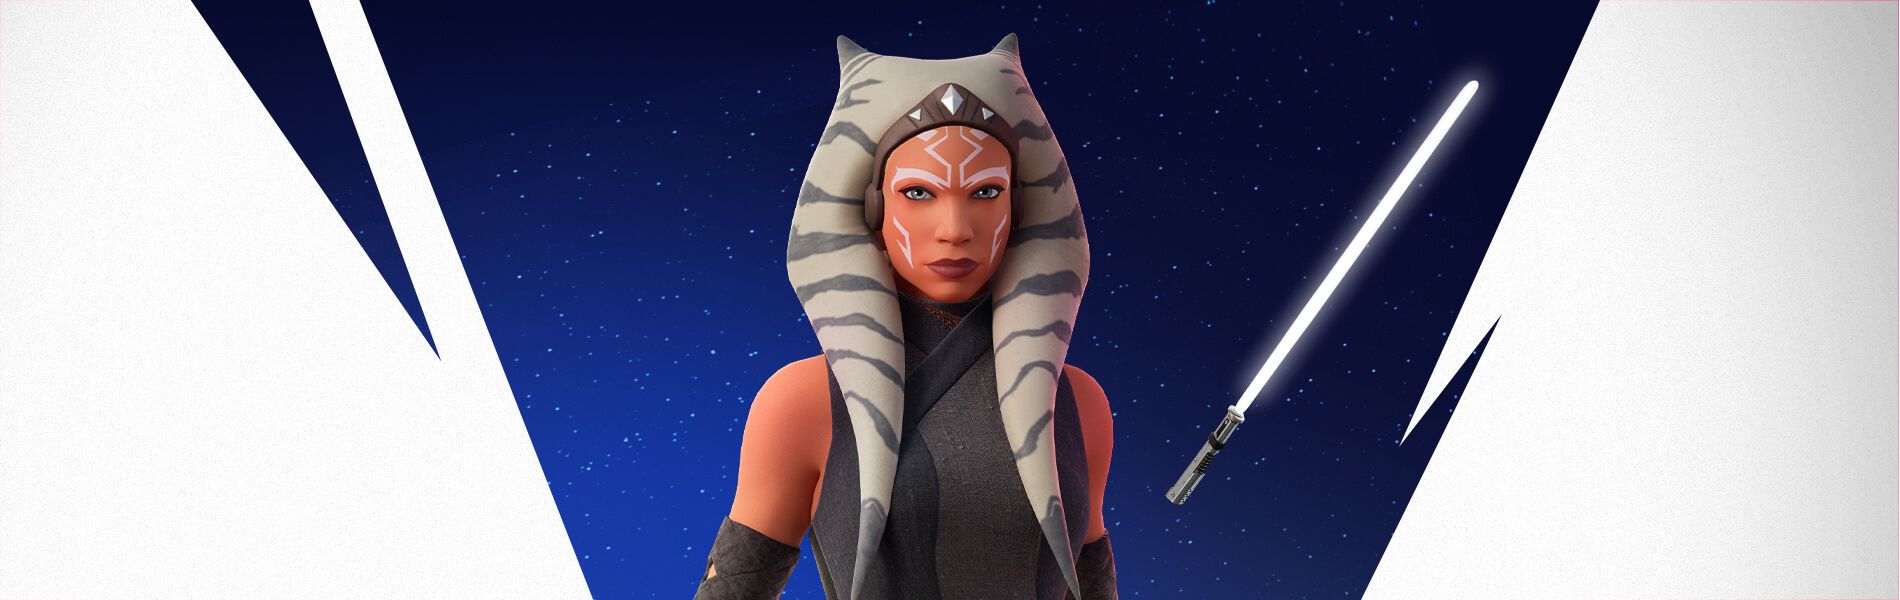 Patch Notes for Fortnite v26.20 - Jedi Training Lightsaber, New Augments and more